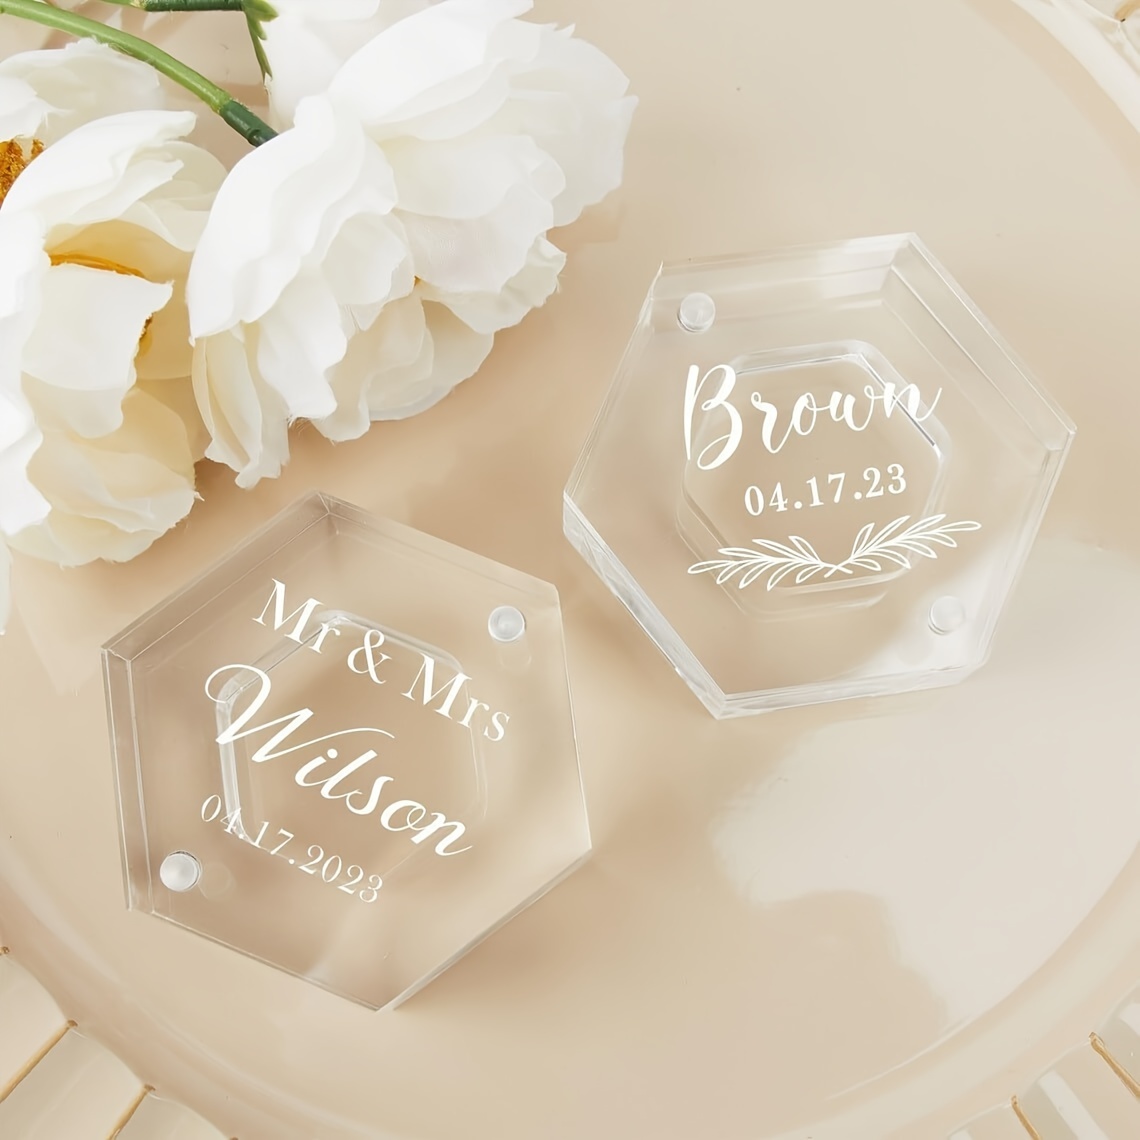 

1pc Personalized Transparent Hexagon Wedding Ring Box, Engraved Romantic Wedding Jewelry Storing Box, Customized Name & Date